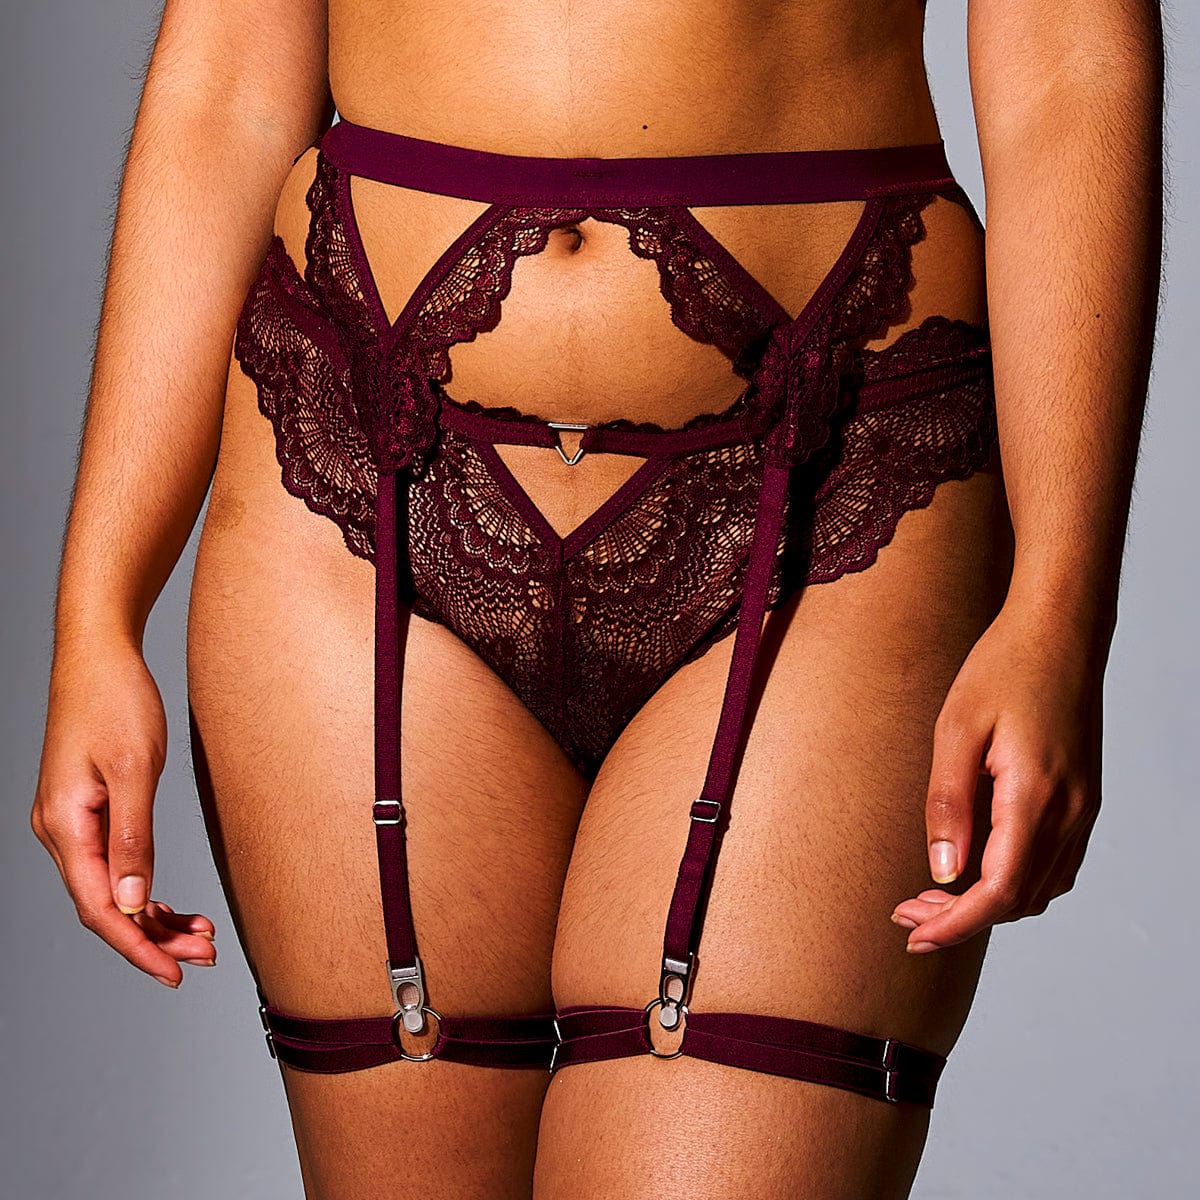 Thistle and Spire Strapped In Sidney Garter Belt Ruby Red Lingerie